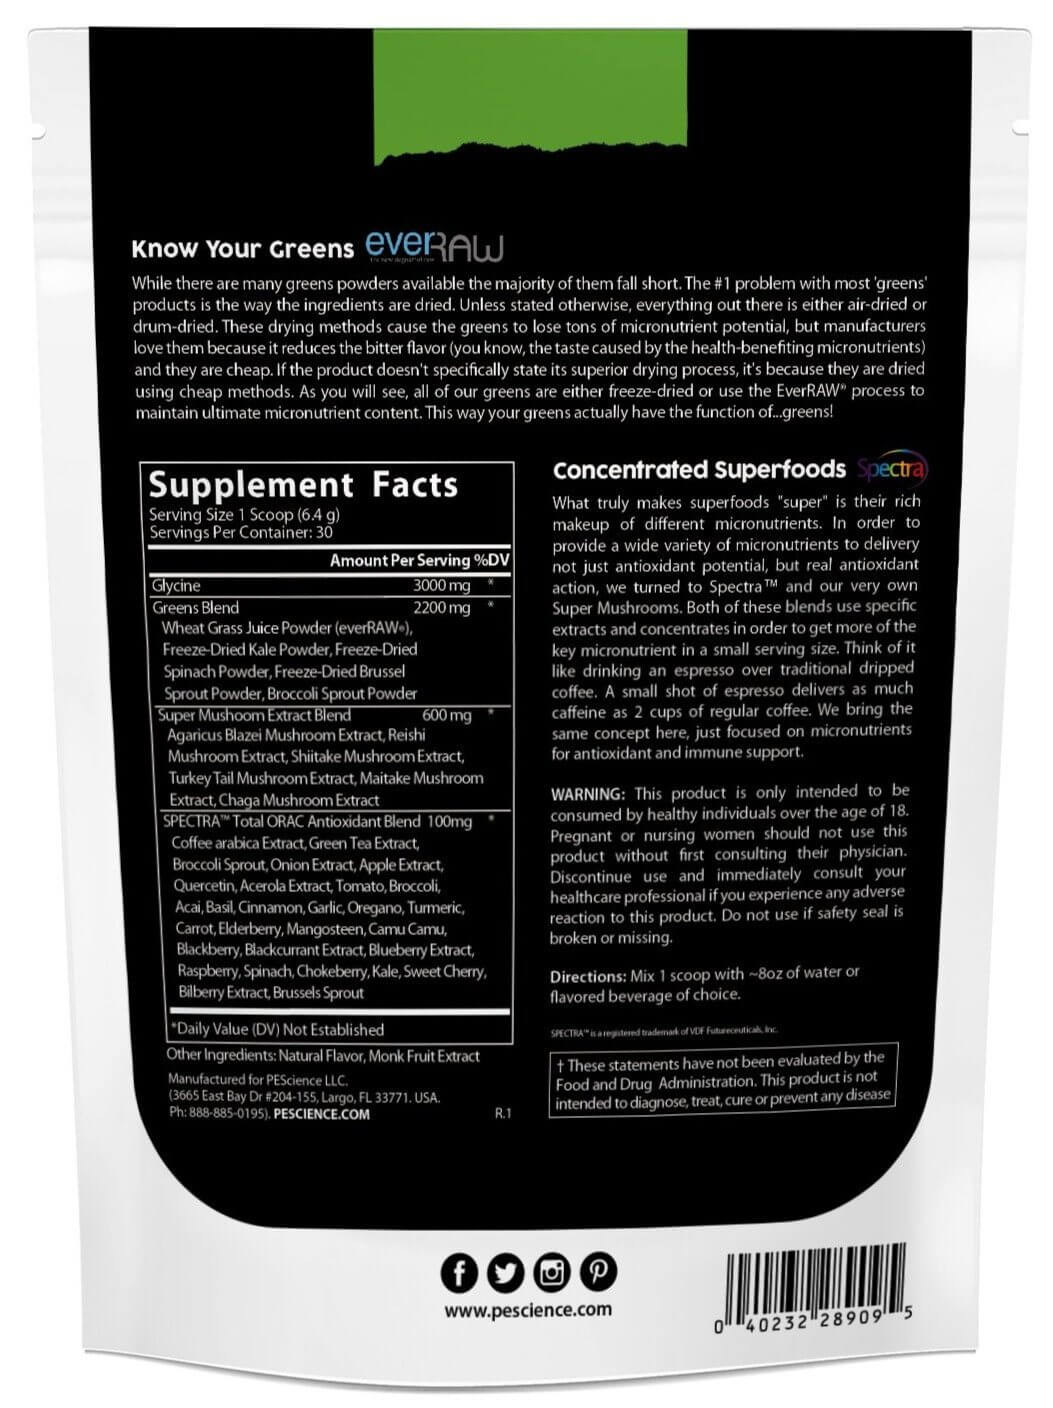 greens-superfoods-supplement-pescience-485903_1800x1800